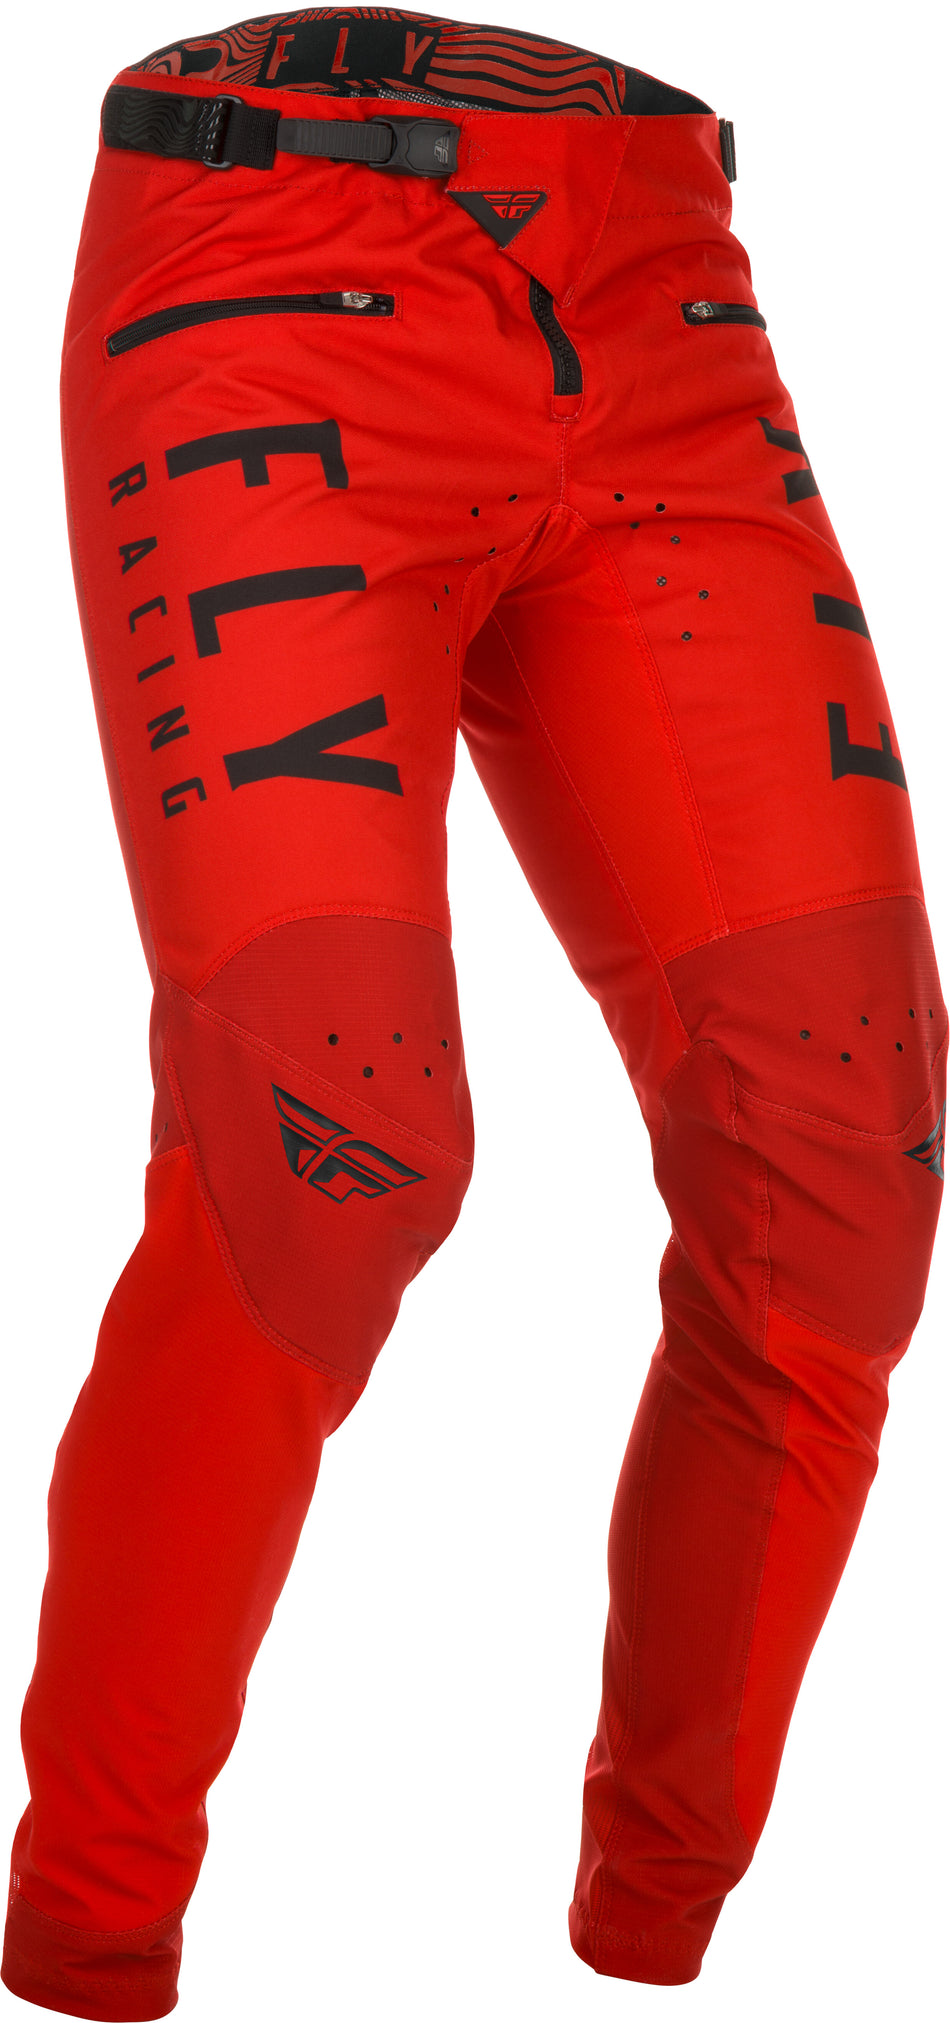 FLY RACING Youth Kinetic Bicycle Pants Red Sz 18 374-04318